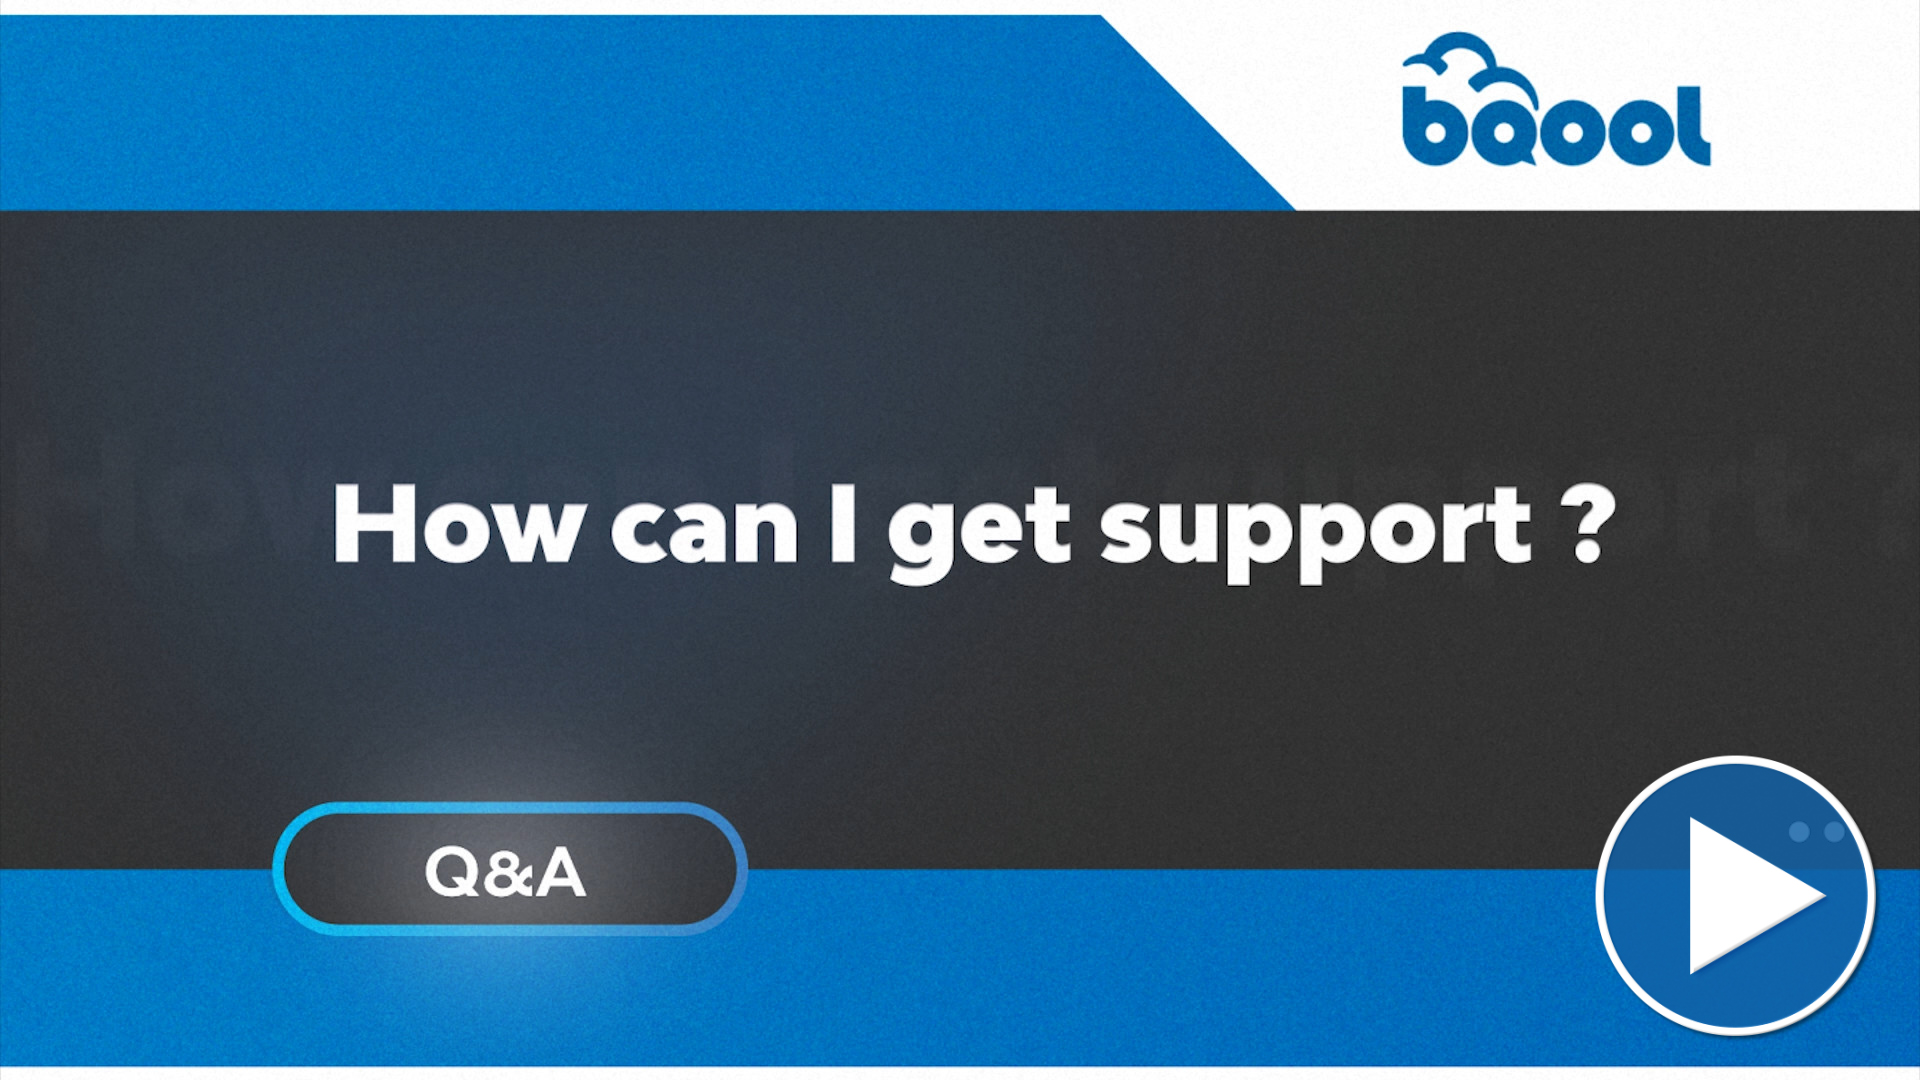 Q4_How_can_I_get_support_with_Button.jpg